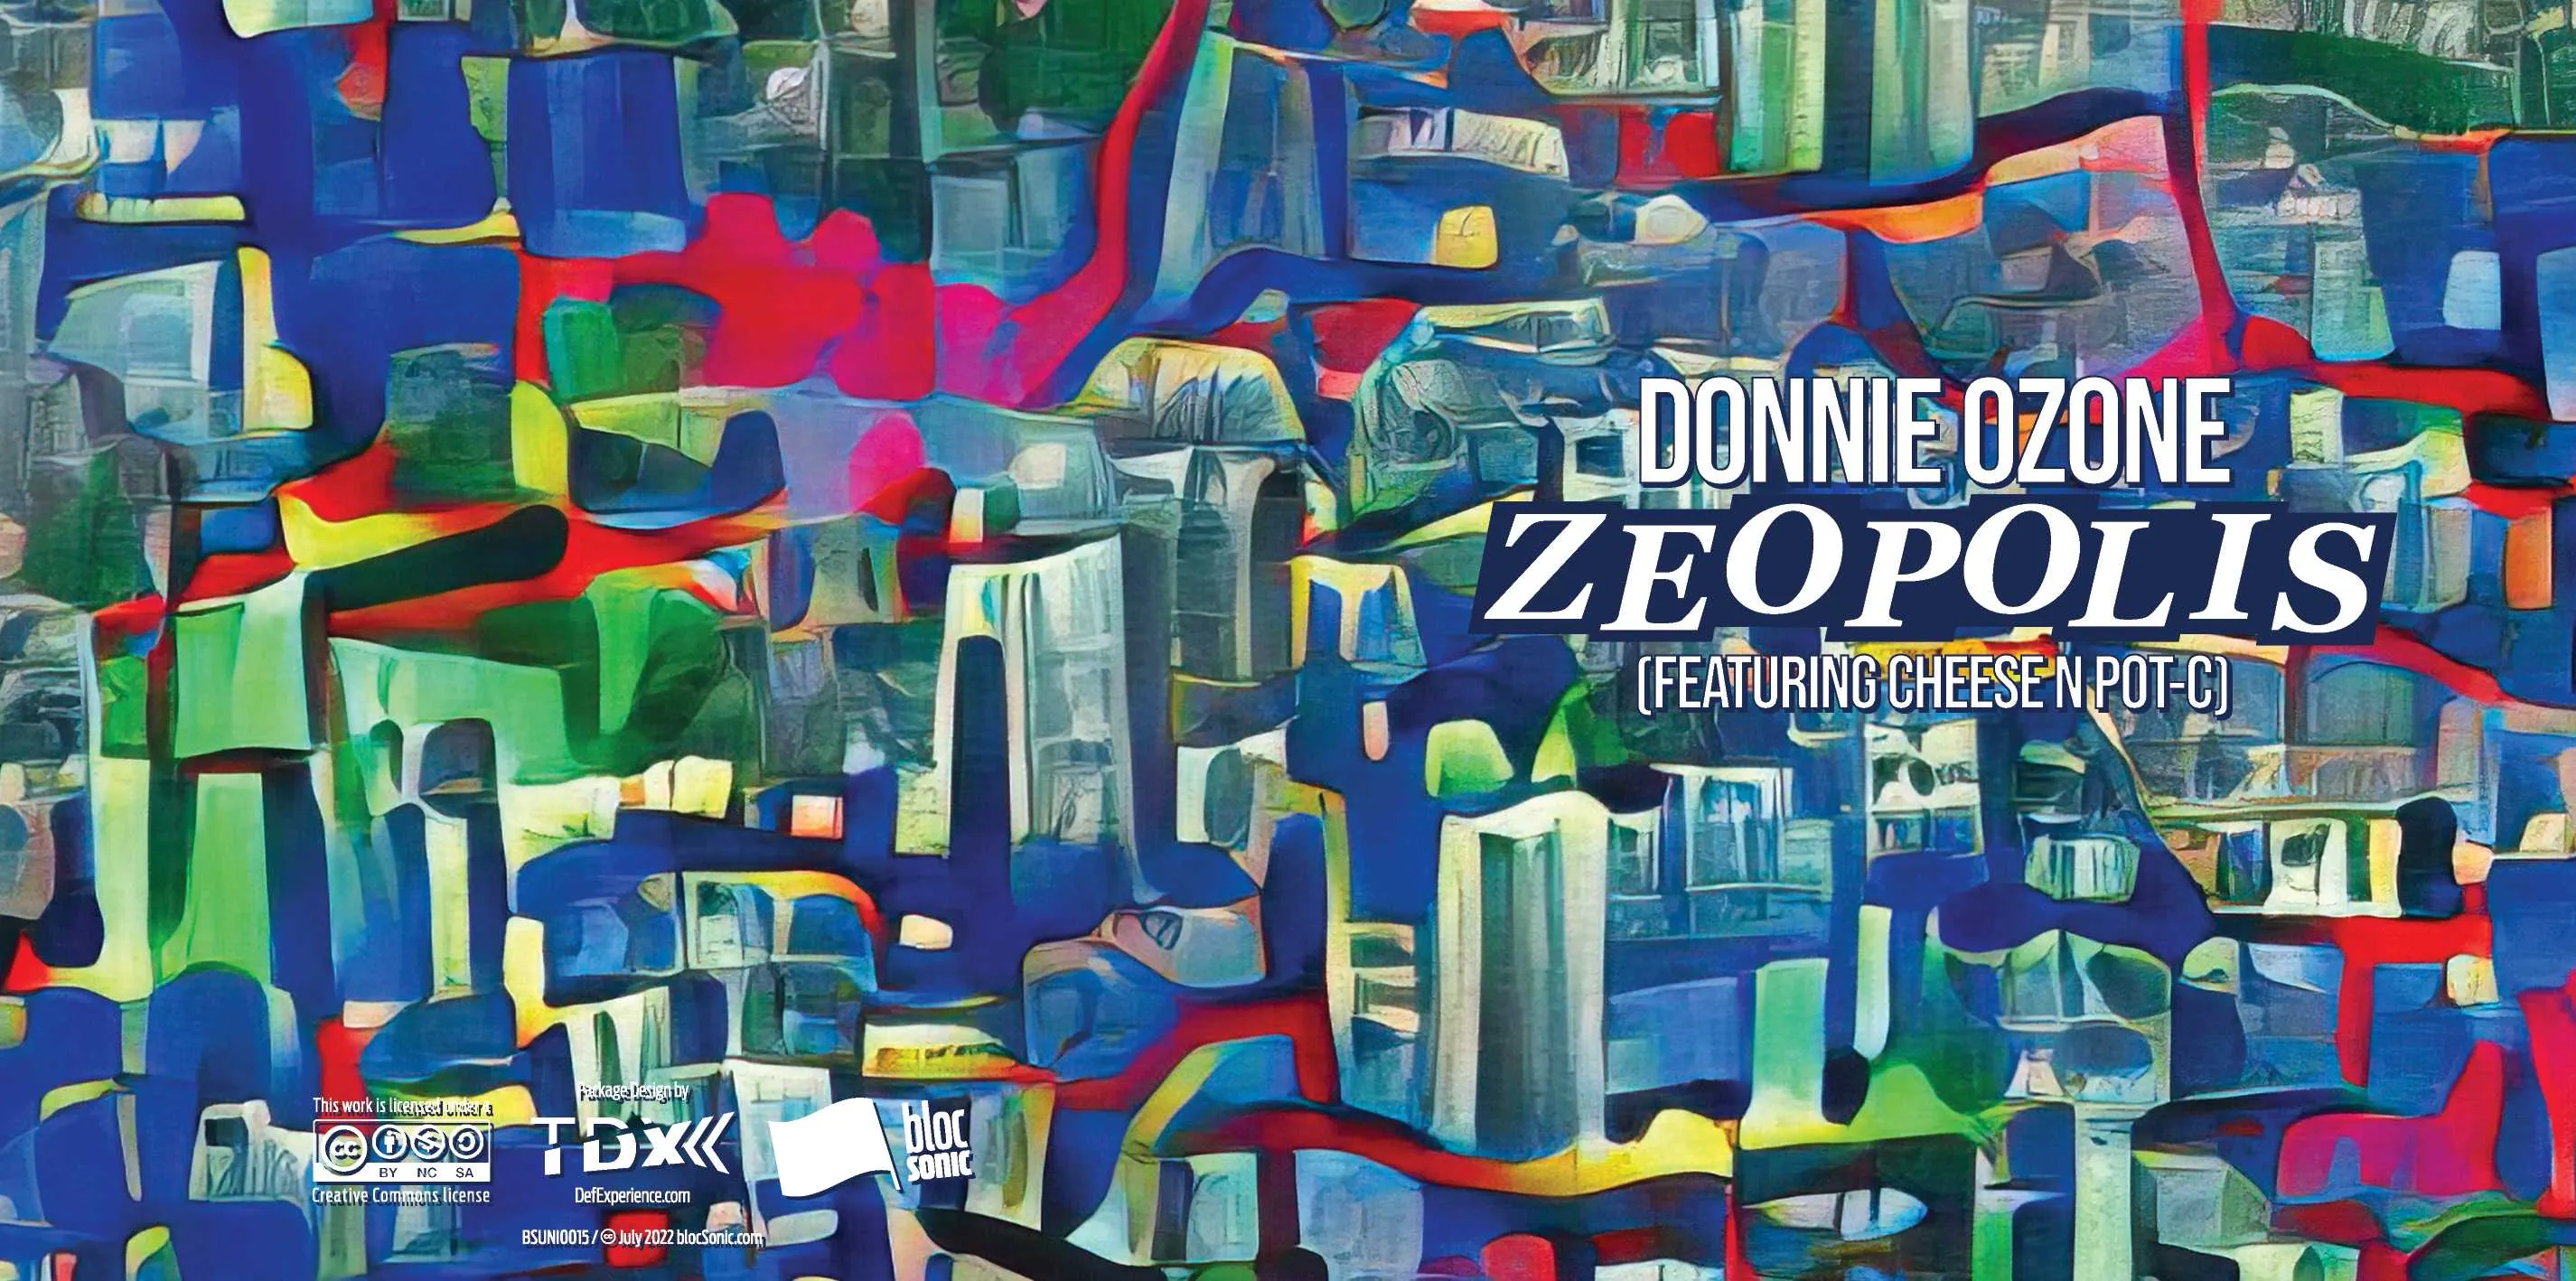 Album insert for “Zeopolis (Featuring Cheese N Pot-C)” by Donnie Ozone